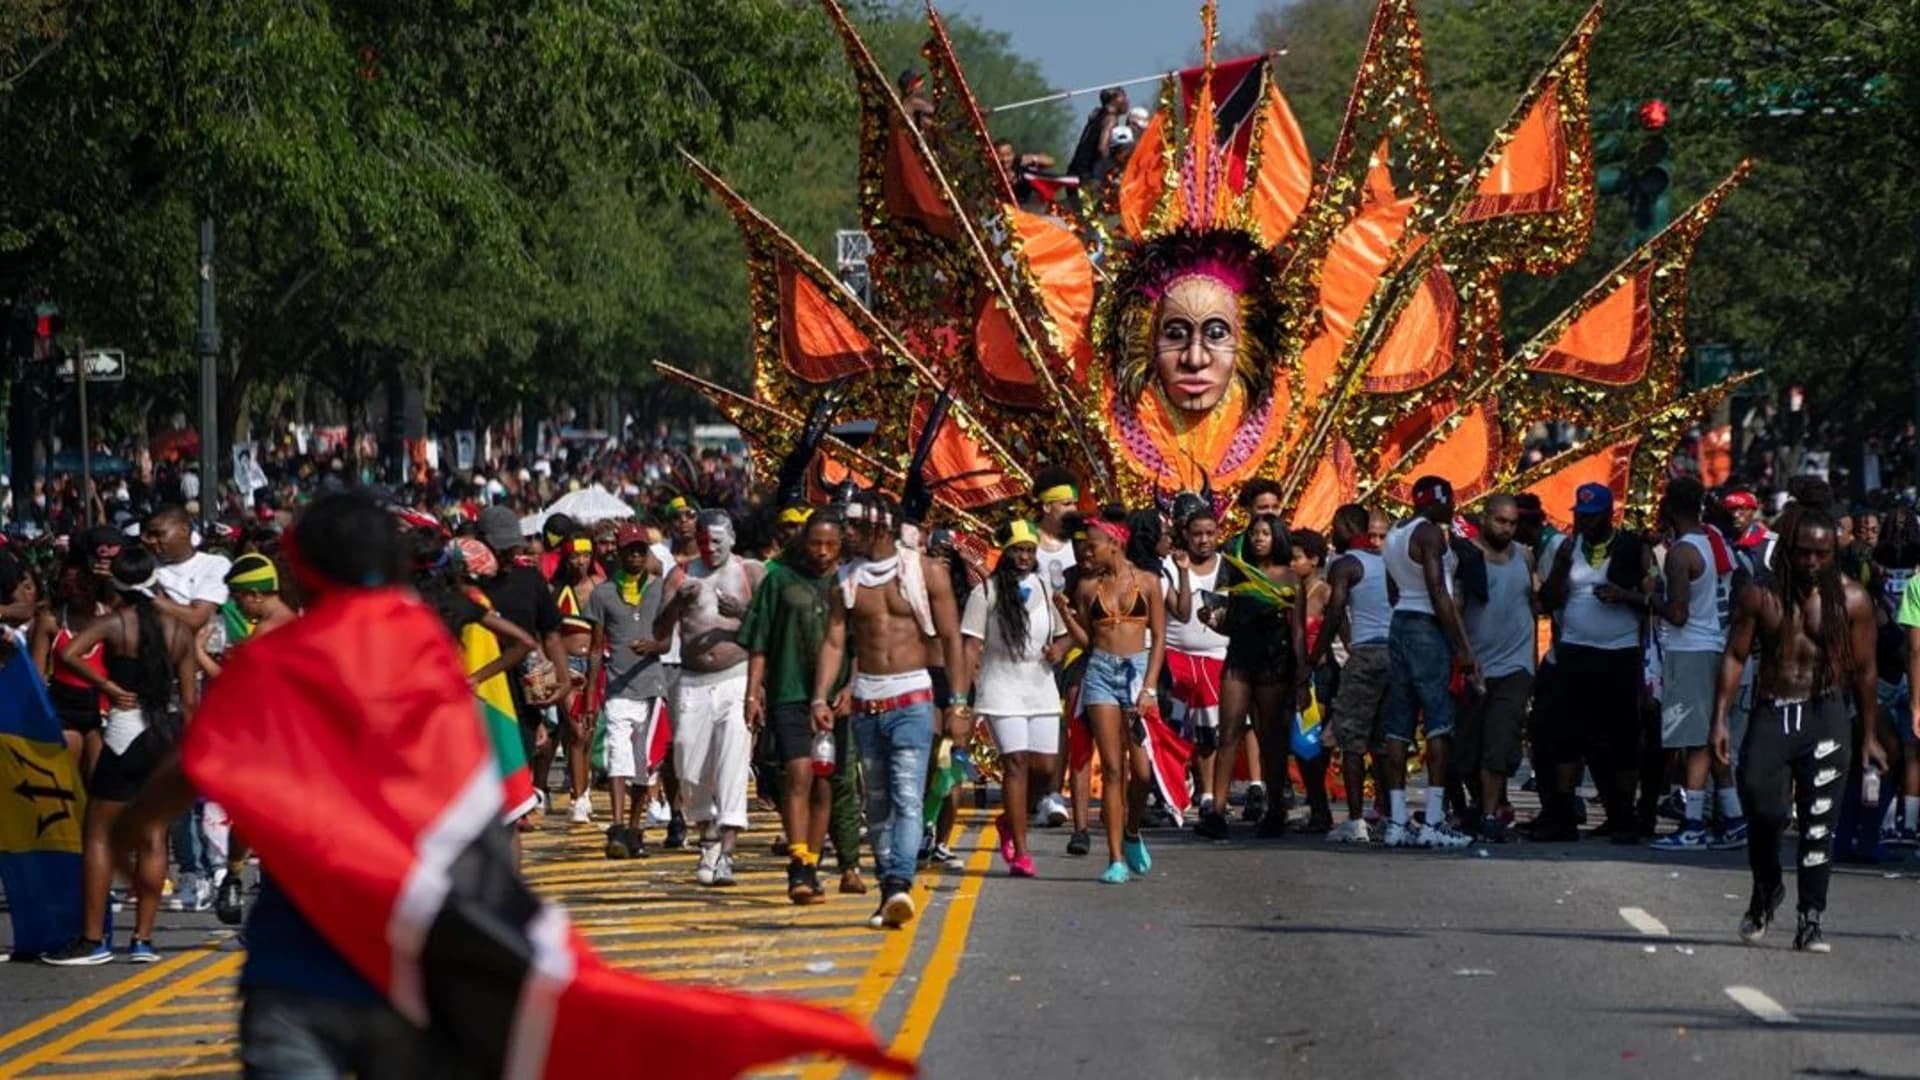 Sights and scenes at the 2019 West Indian American Day Parade